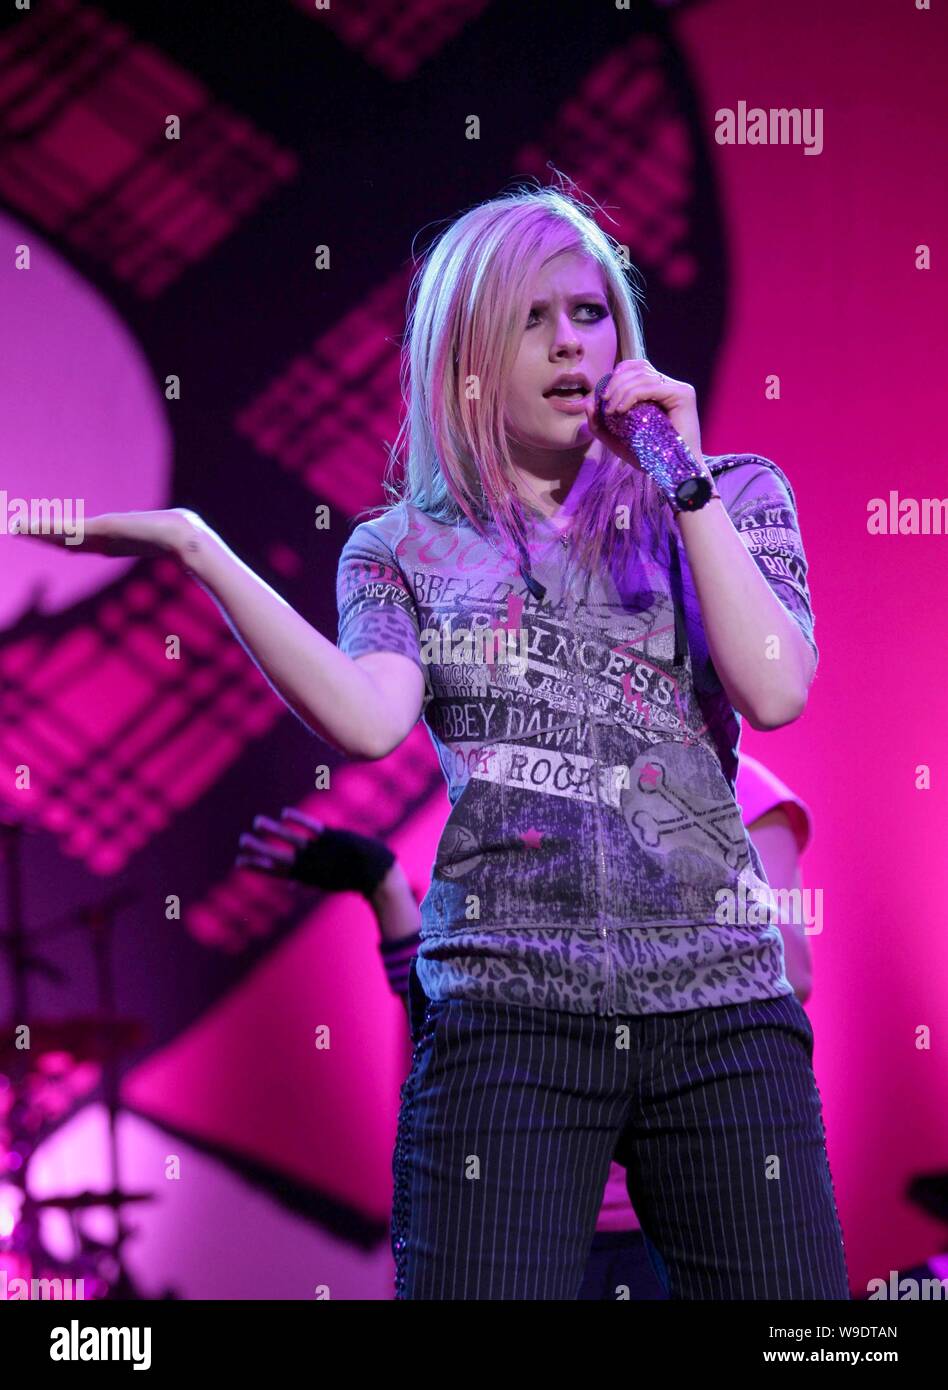 Canadian singer Avril Lavigne performs at a solo concert of her tour, The Best Damn Tour, at Beijing Olympic Basketball Gymnasium in Beijing, China, S Stock Photo